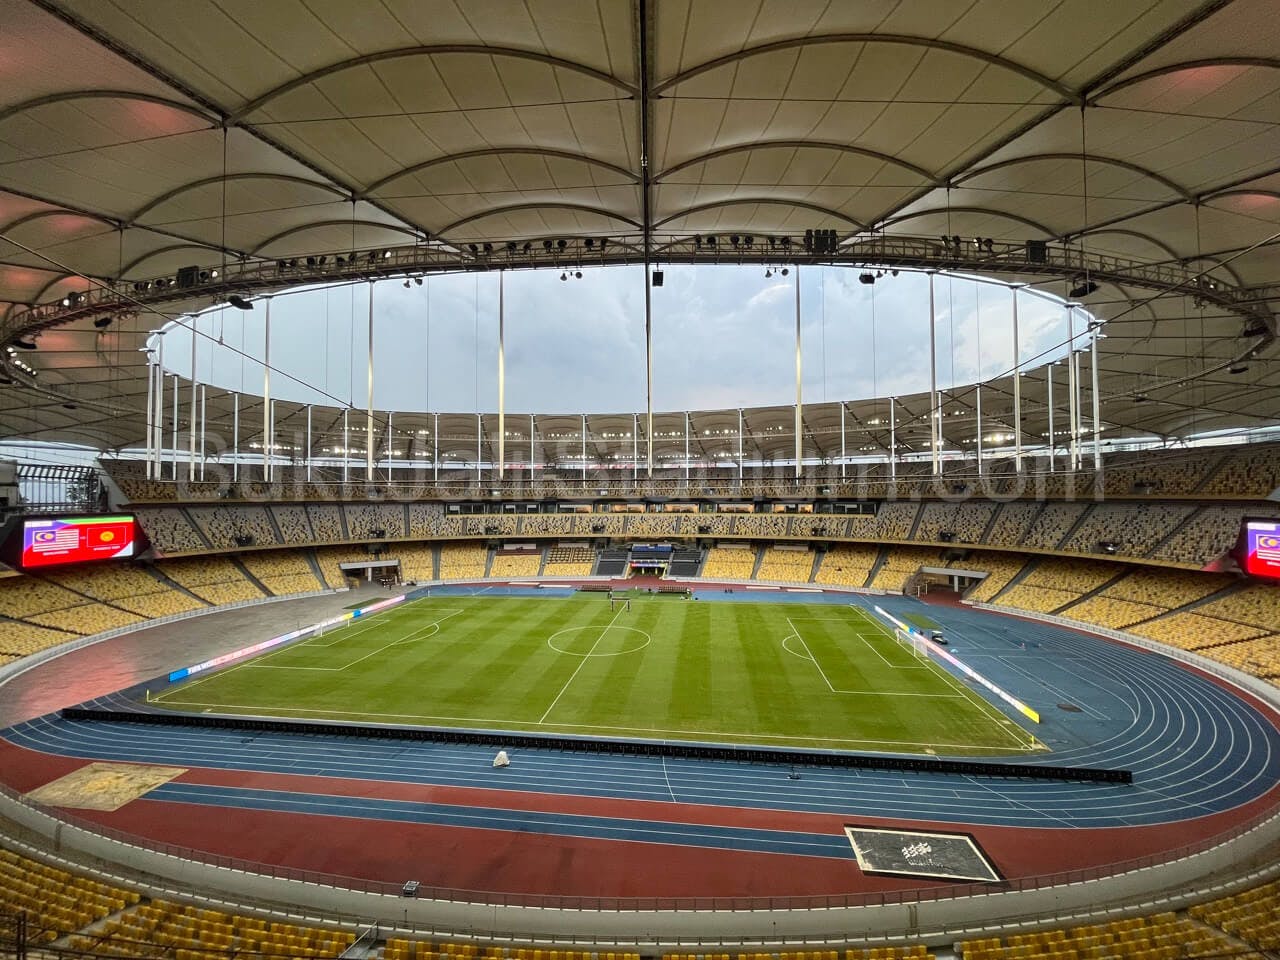 0.5x View of Bukit Jalil field from section 313 of Stadium Bukit Jalil.